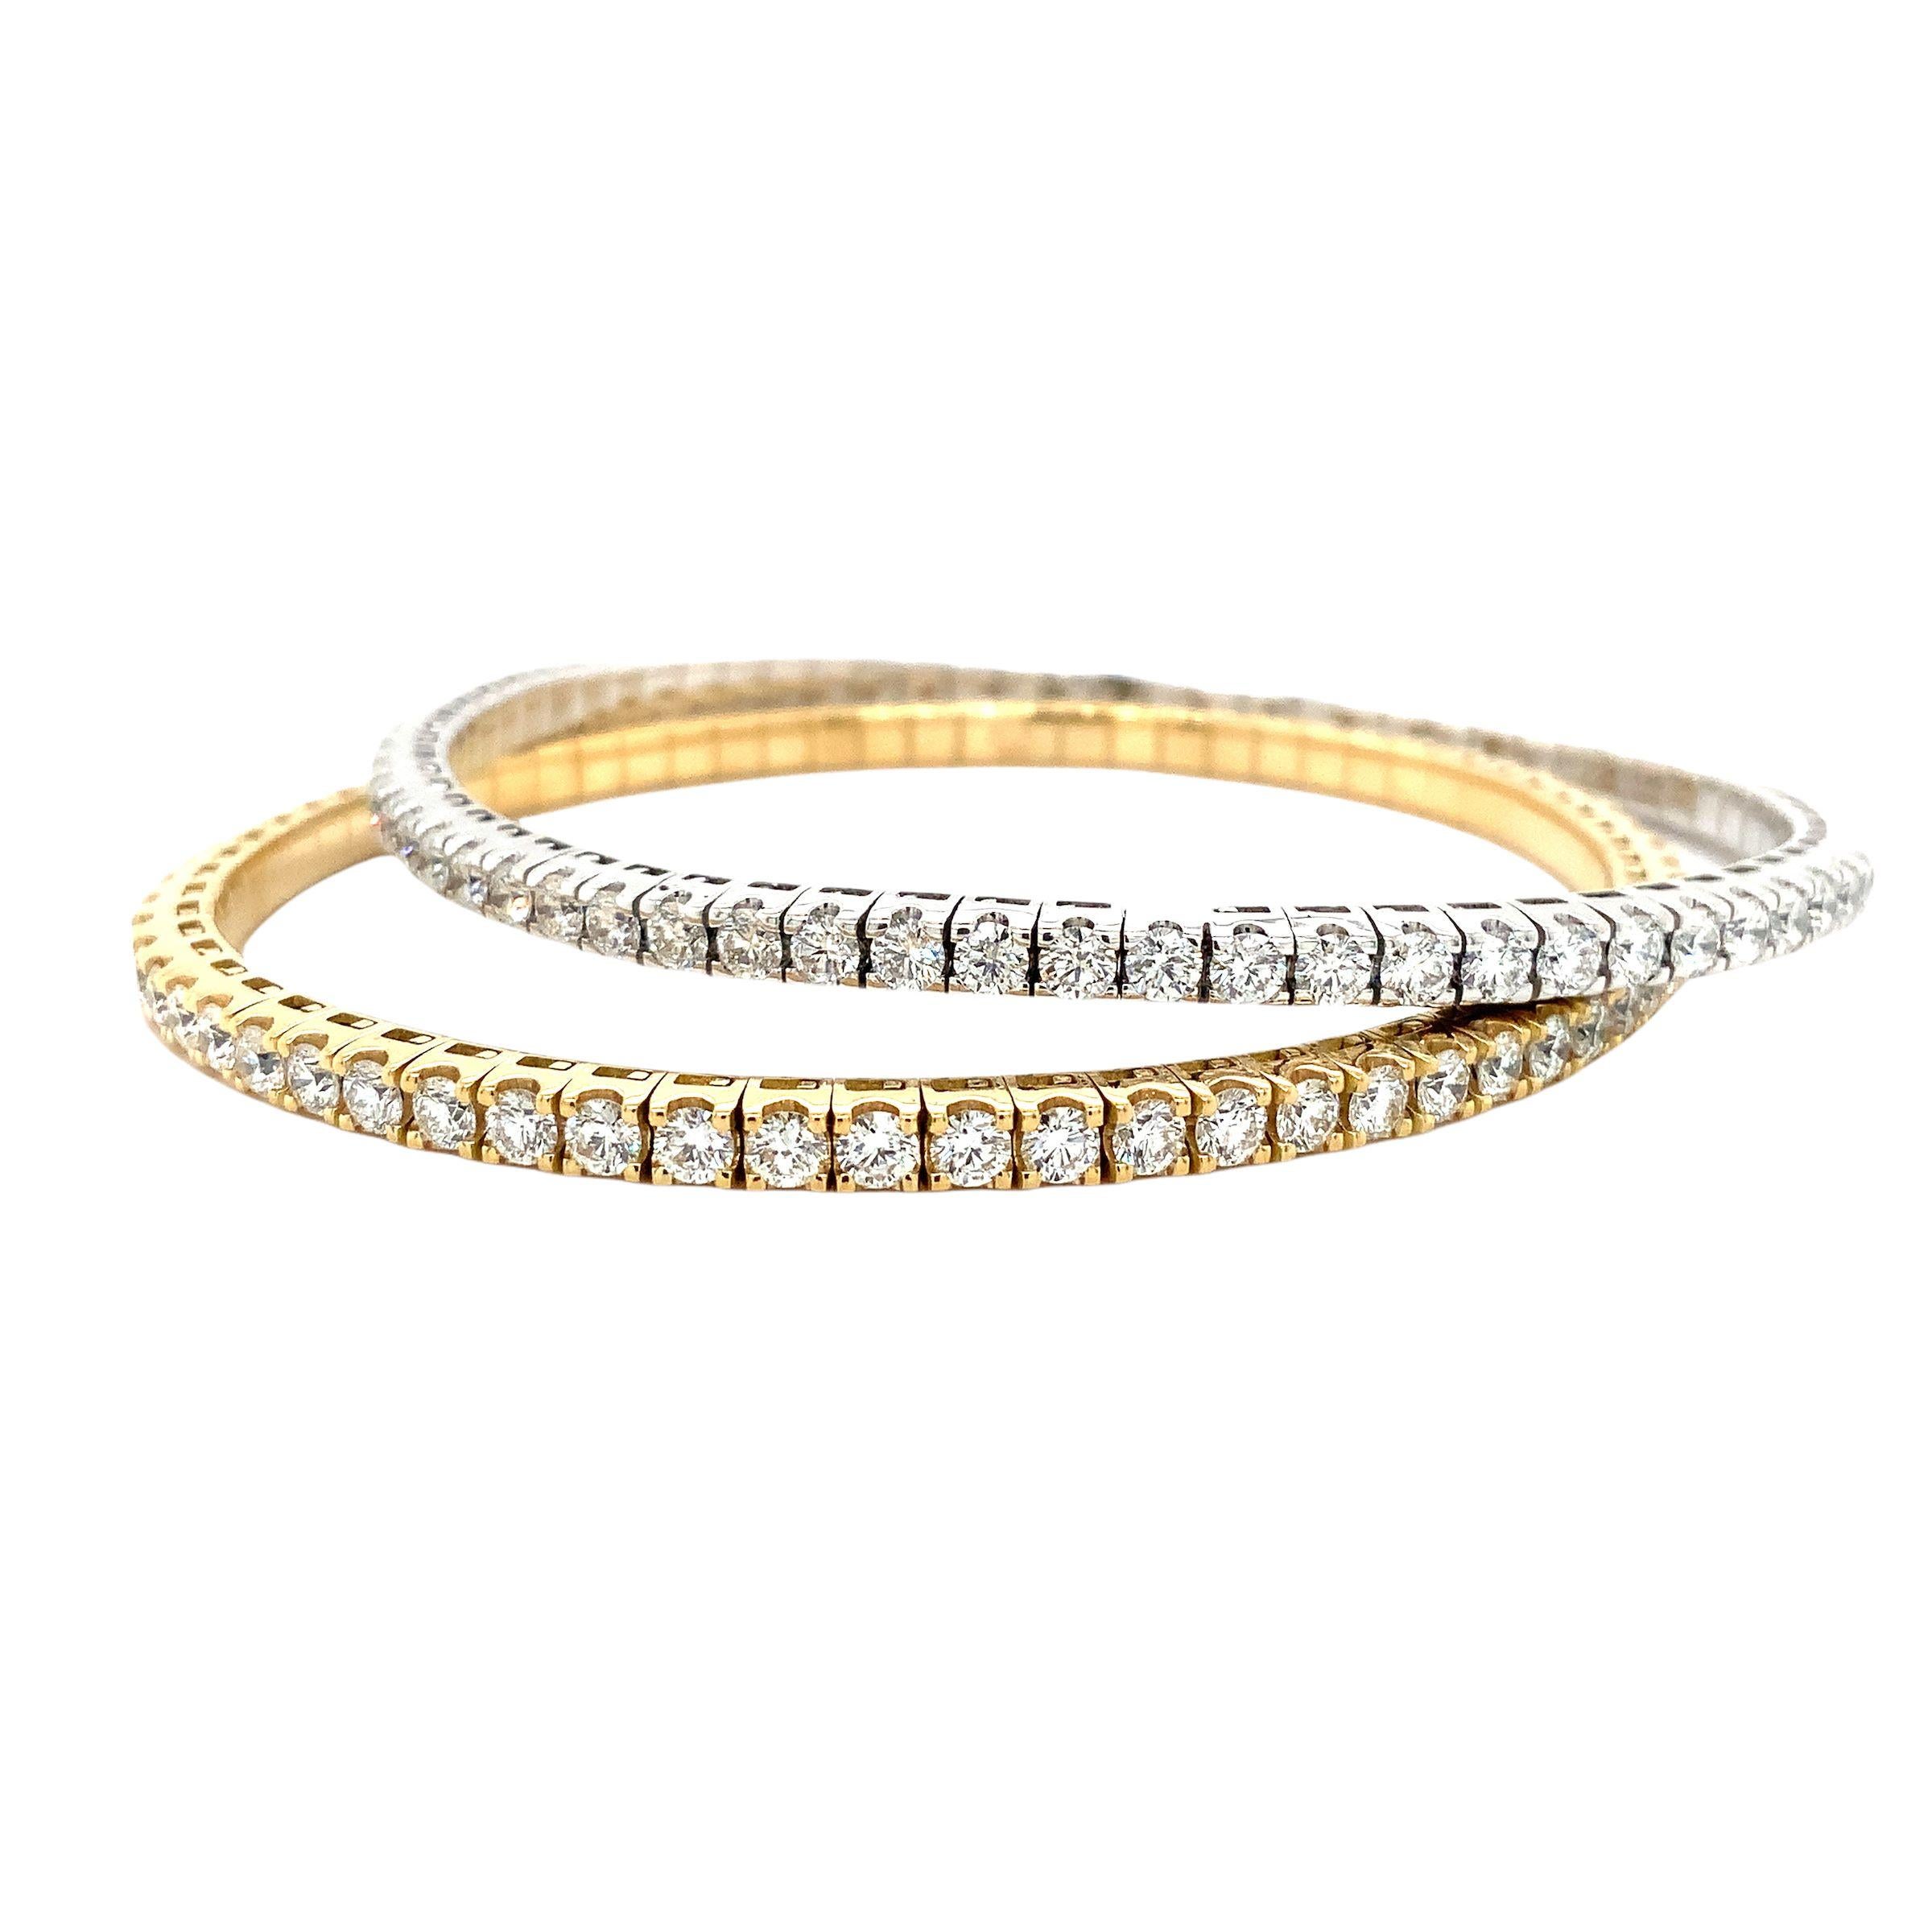 A Link Collection Classic Stretchy Diamond Bracelet 3.44ct Set in 18K Gold In New Condition For Sale In Los Gatos, CA